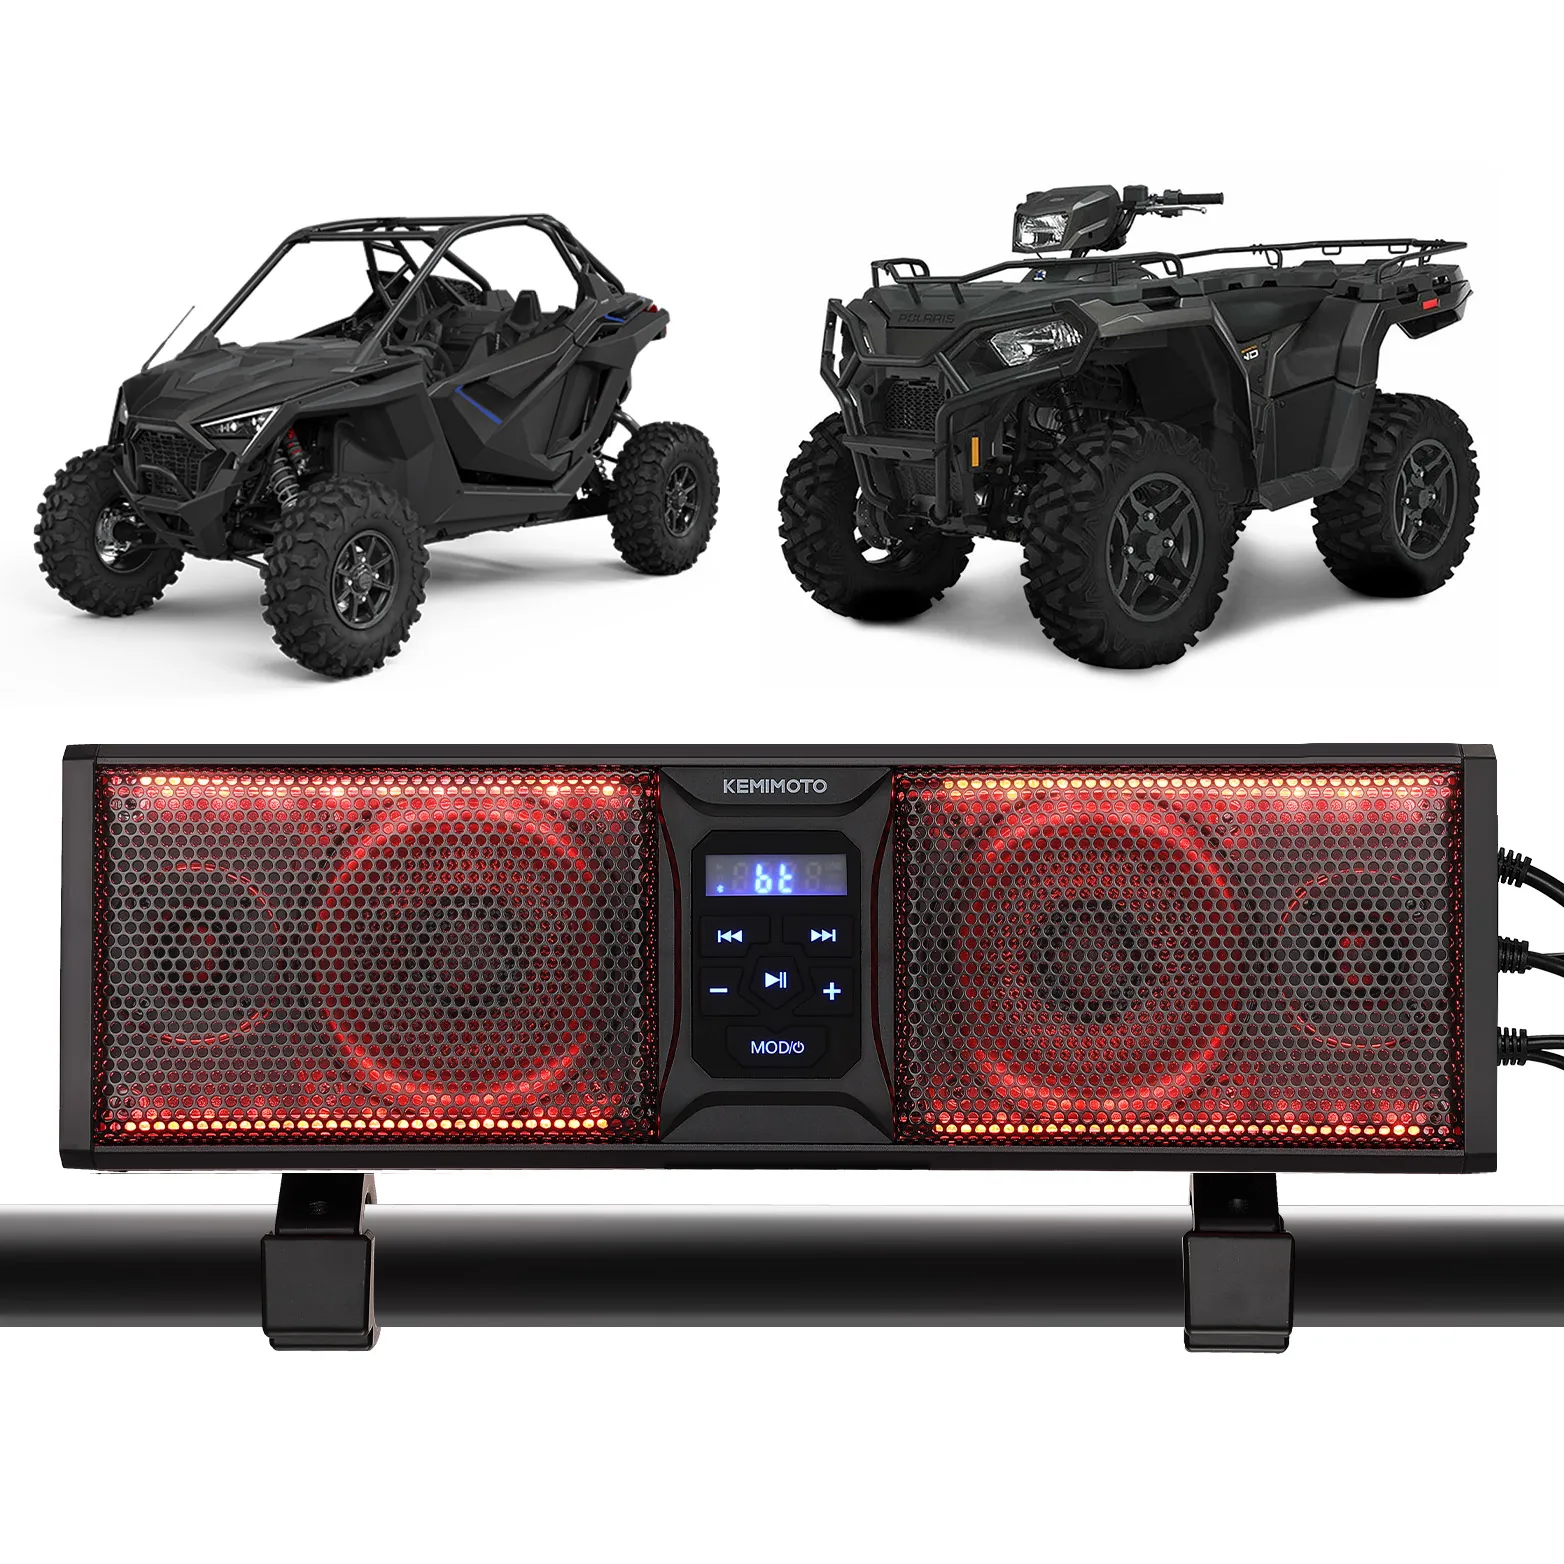 16inch UTV Sound Bar System SXS Speakers Waterproof Bluetooth Multicolor LED Lighting for Can-Am X3 Compatible with Polaris RZR waterproof marine stereo bluetooth radio motorcycle audio boat car mp3 player auto sound system fm am receiver for spa utv atv